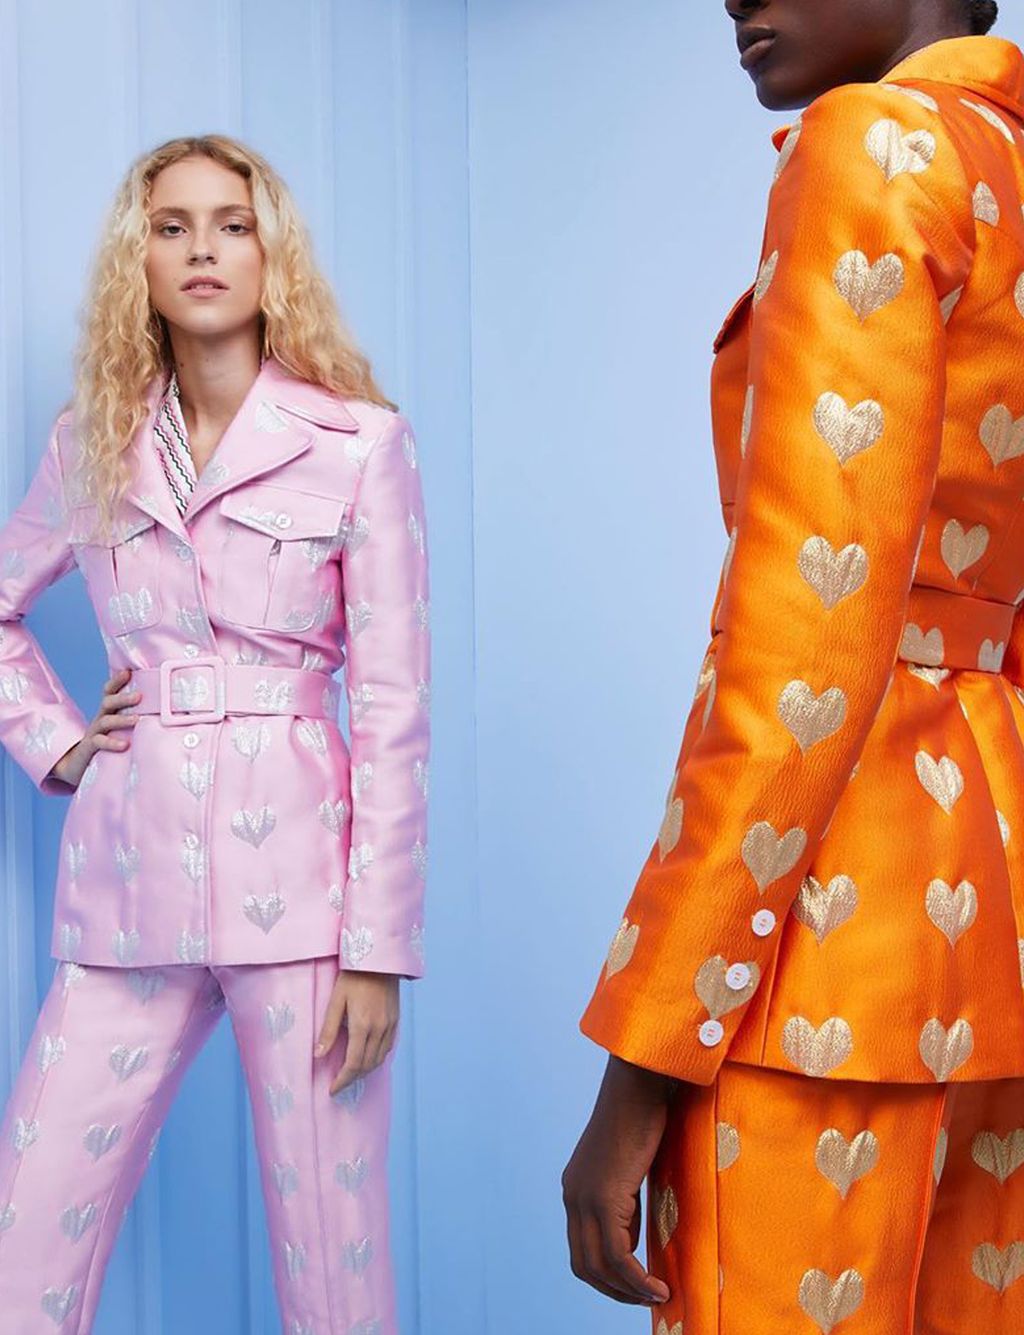 This Little-Known Brand Creates the Best Feel-Good Prints | Who What Wear